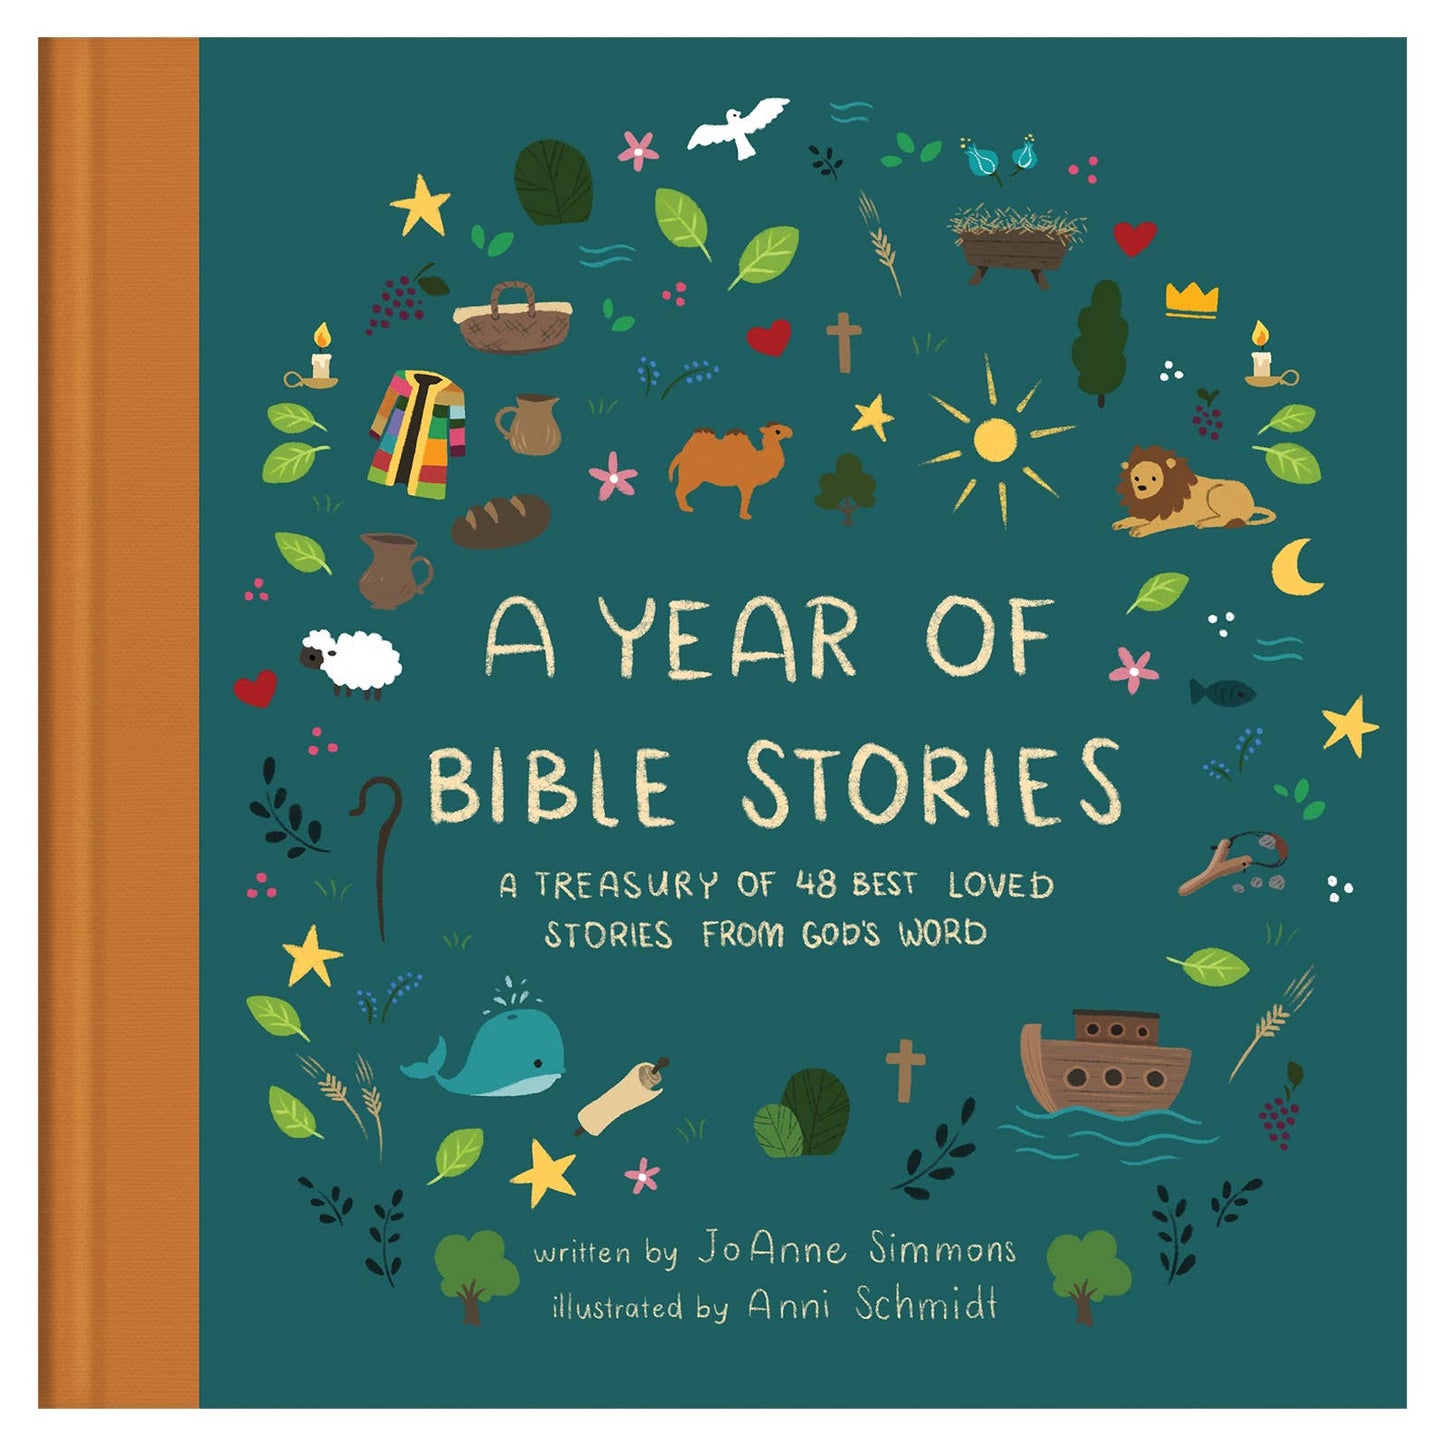 Year of Bible stories kids book